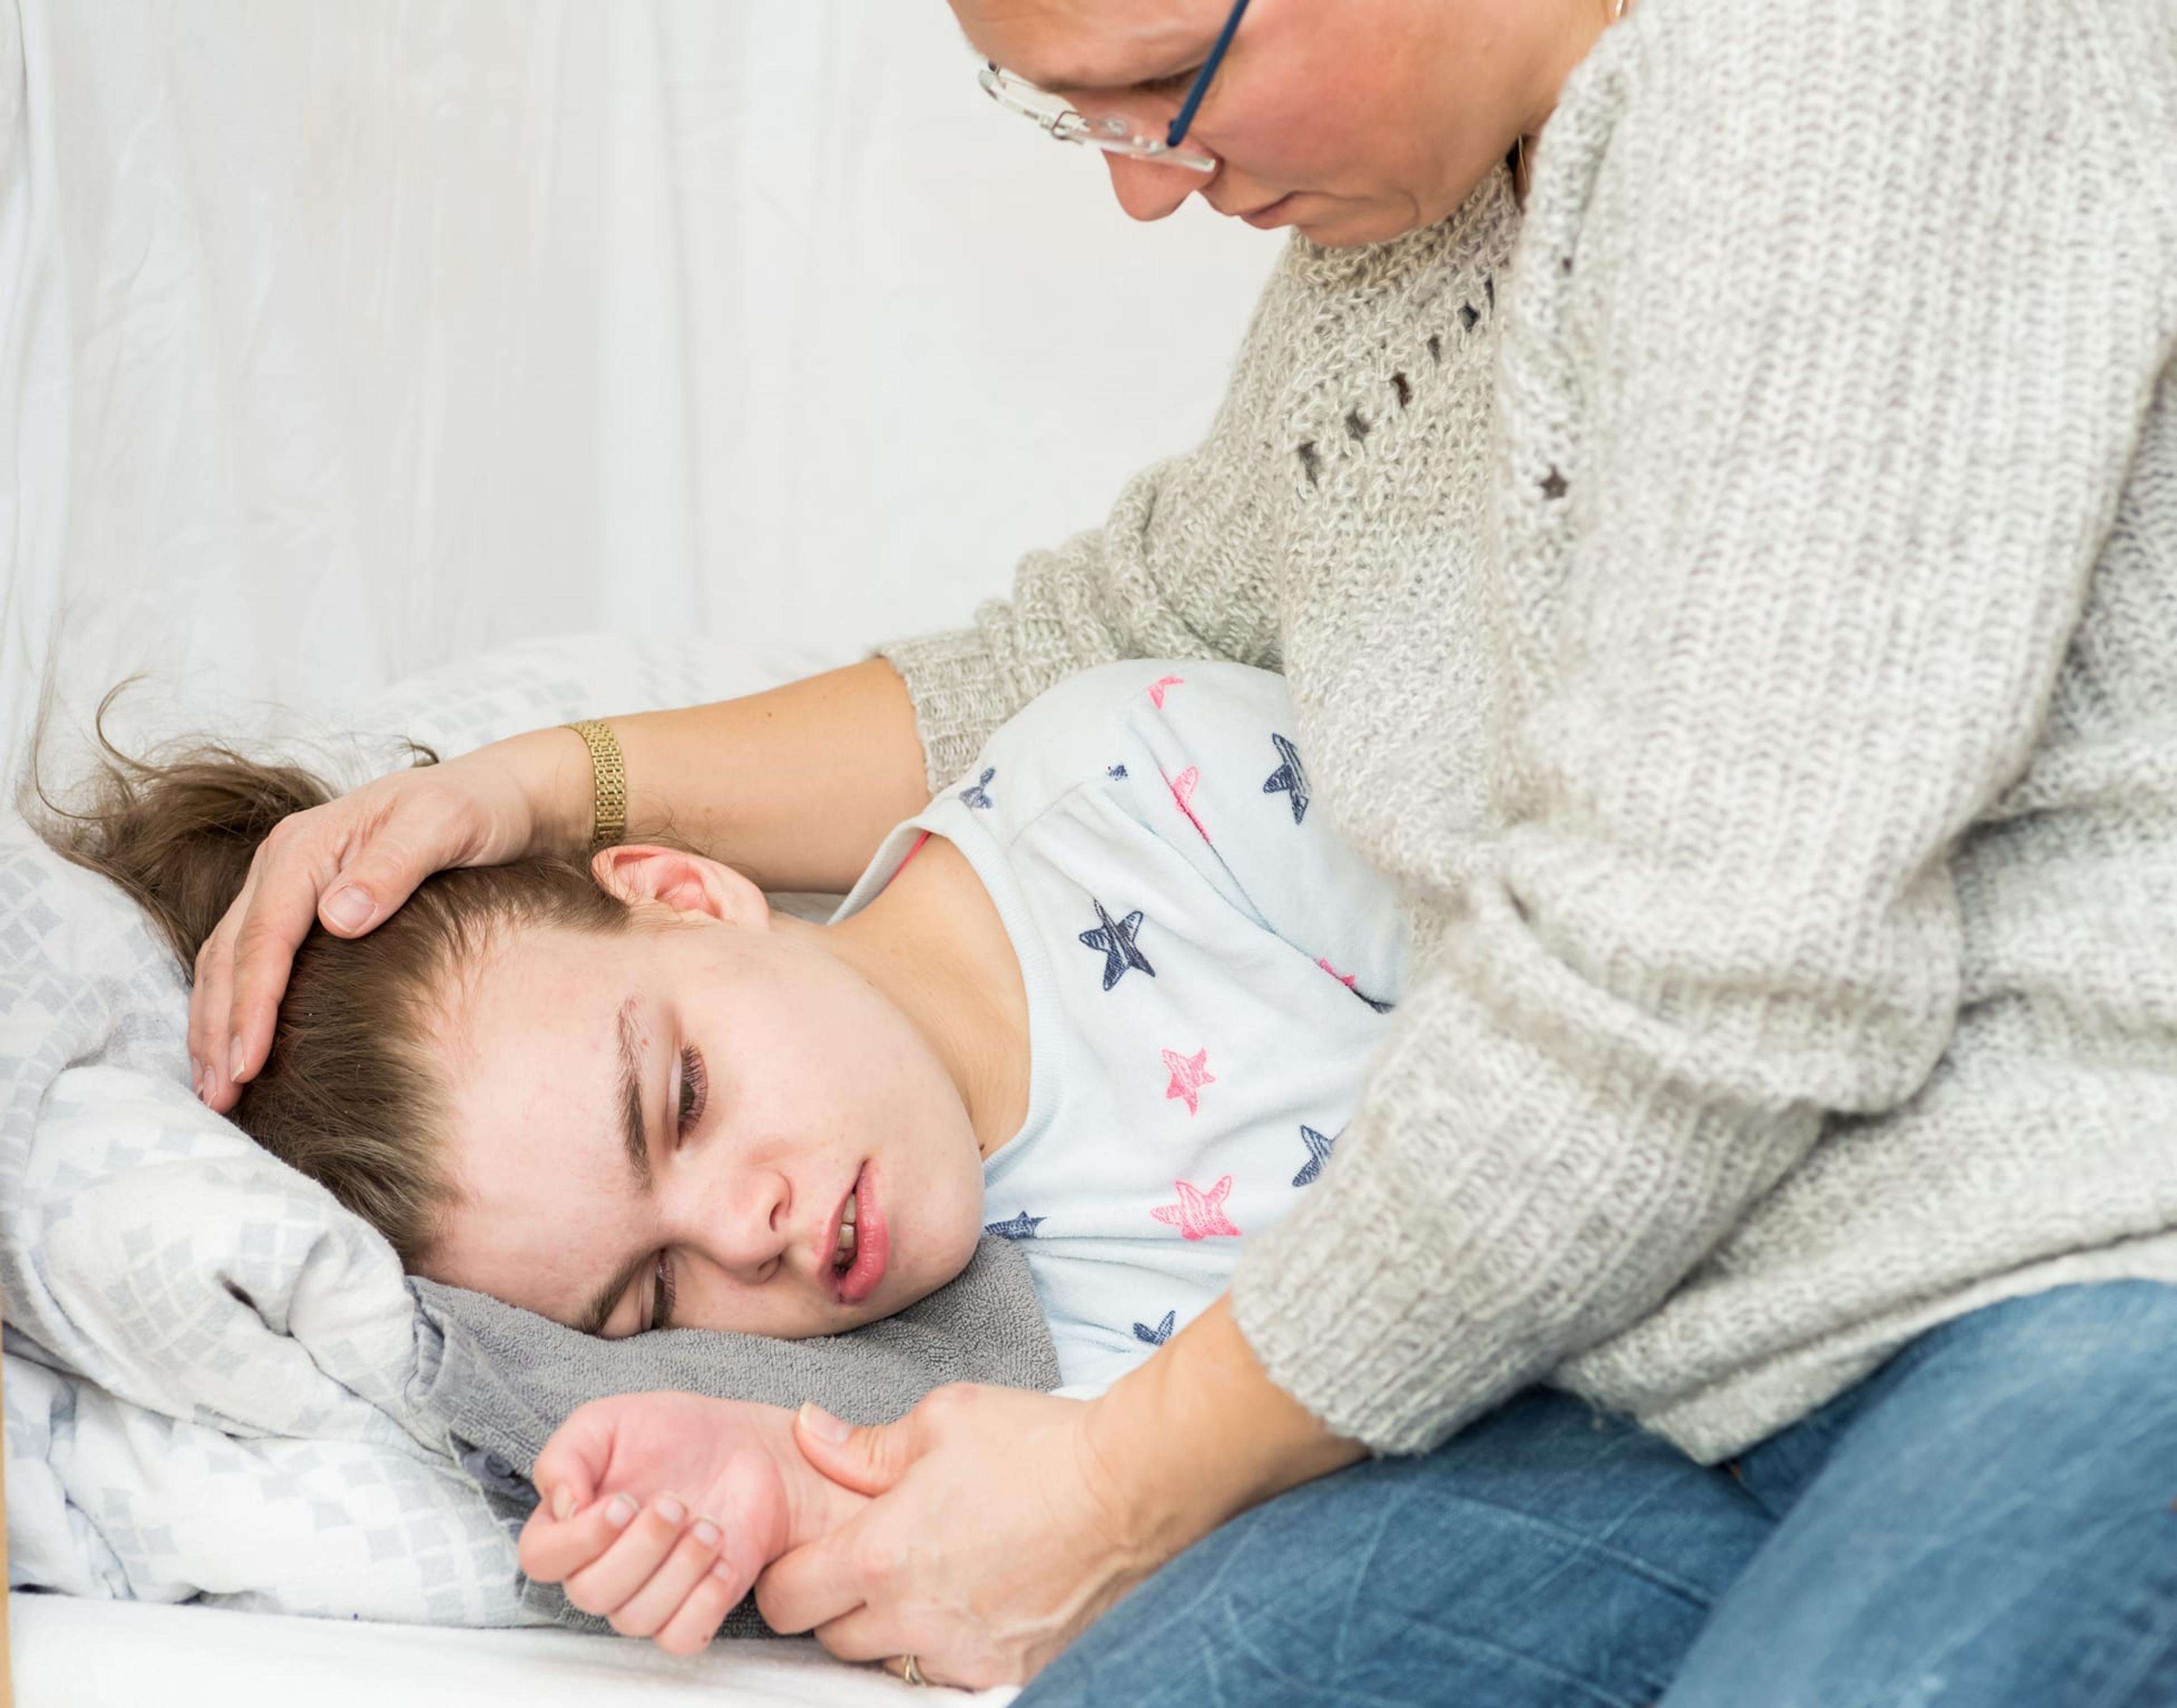 Child experiencing an epileptic seizure is cared for by a caregiver